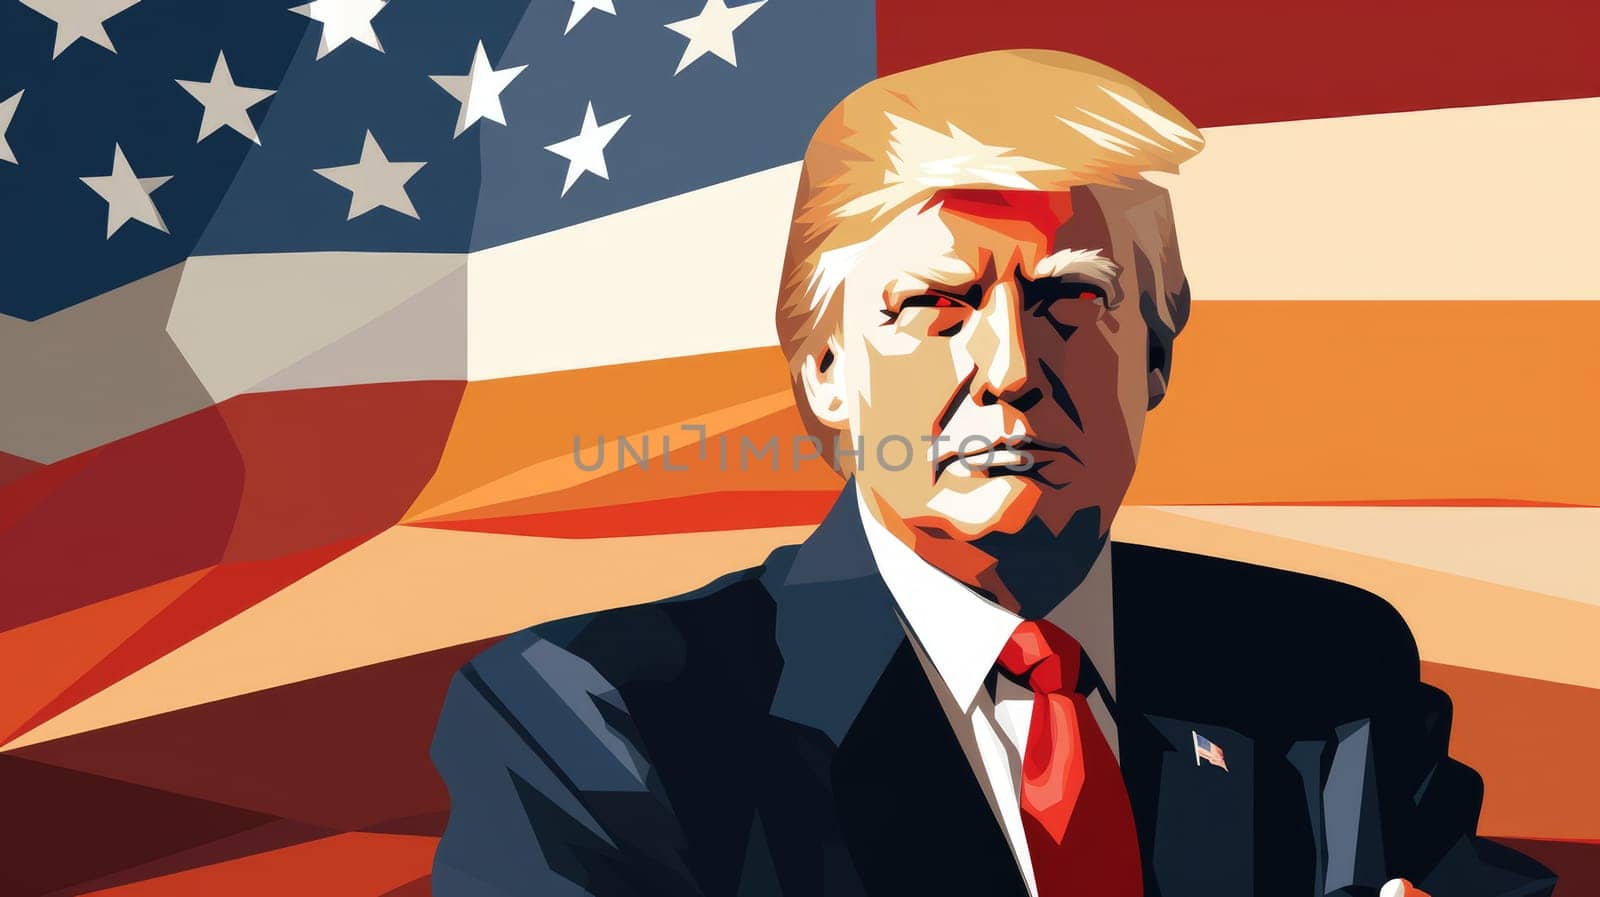 Donald Trump Standing in front of the U.S Flag. by palinchak